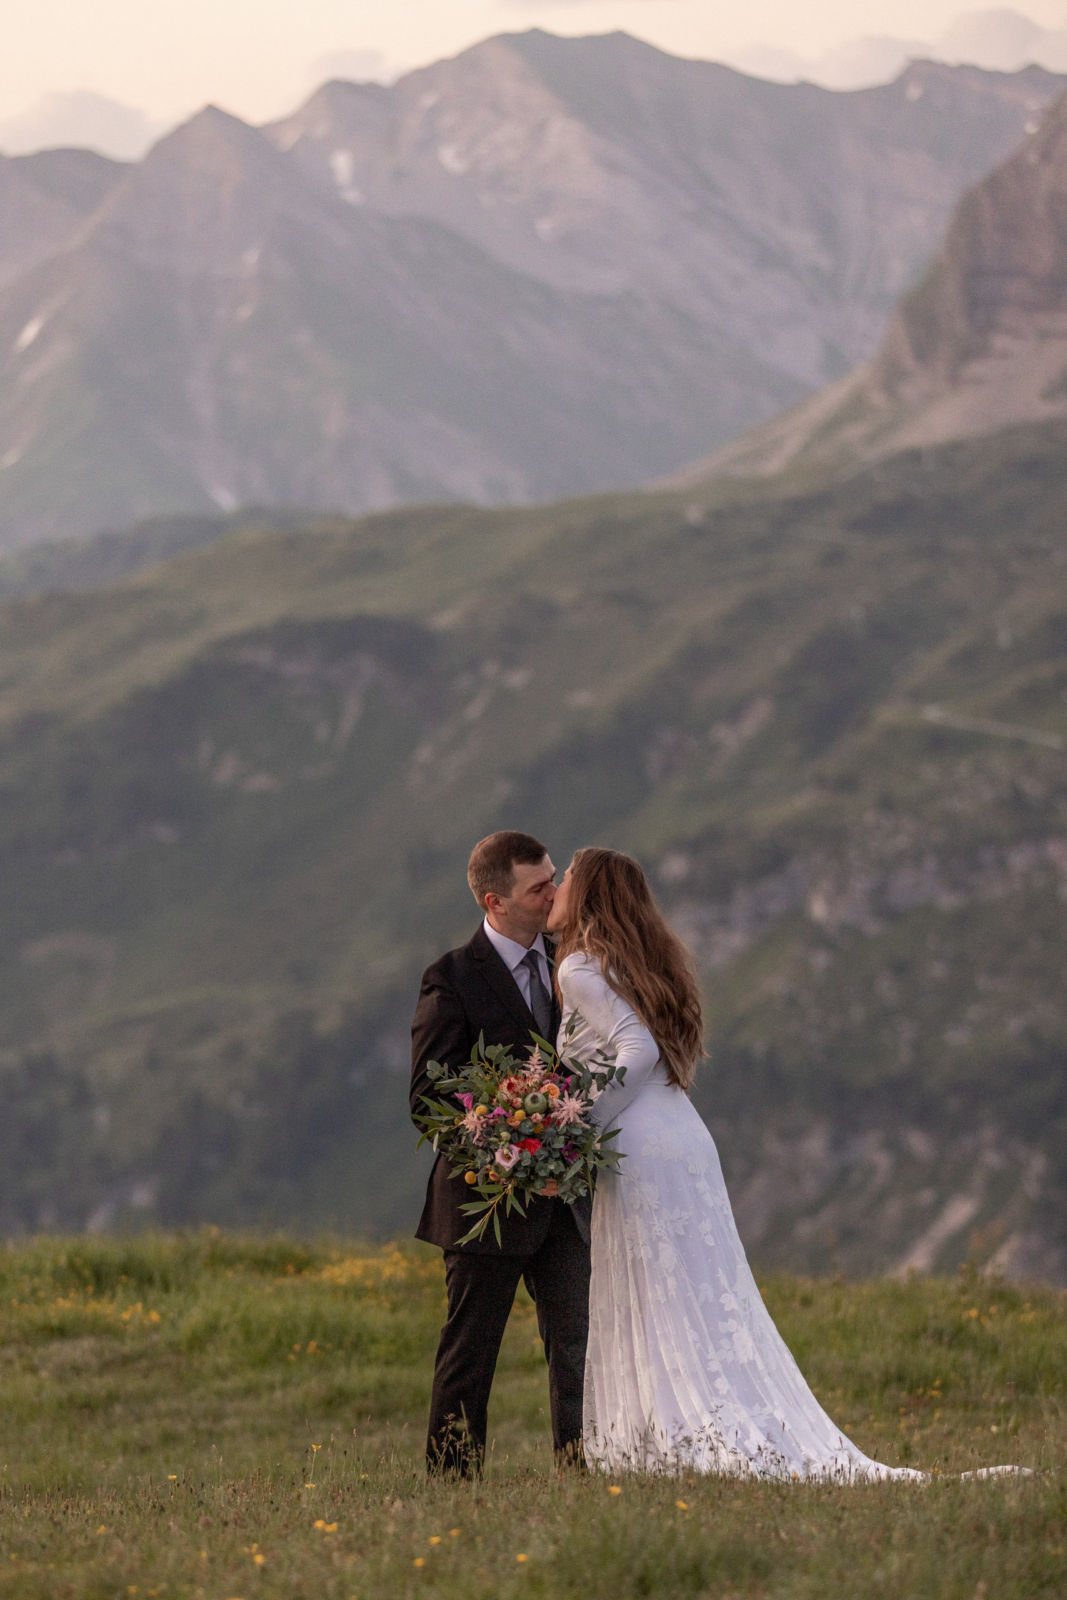 First Look at the Summer Solstice Mountain Elopement in the Alps